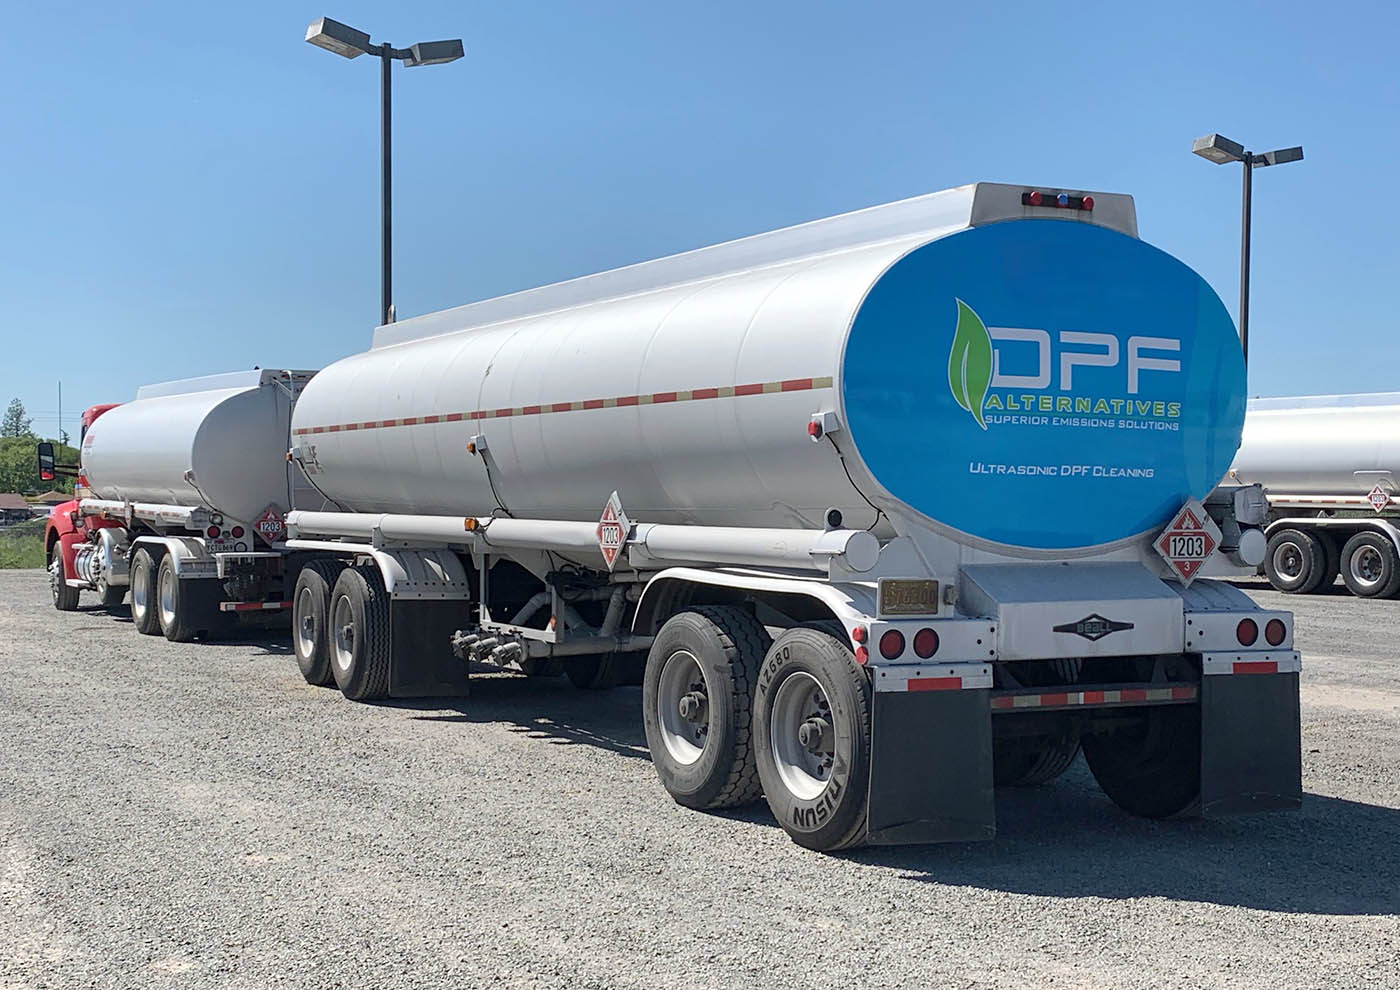 Back of a clean, large, reflective semi truck rig, contact DPF Alternatives for a DPF cleaning in Rapid City / South Dakota.